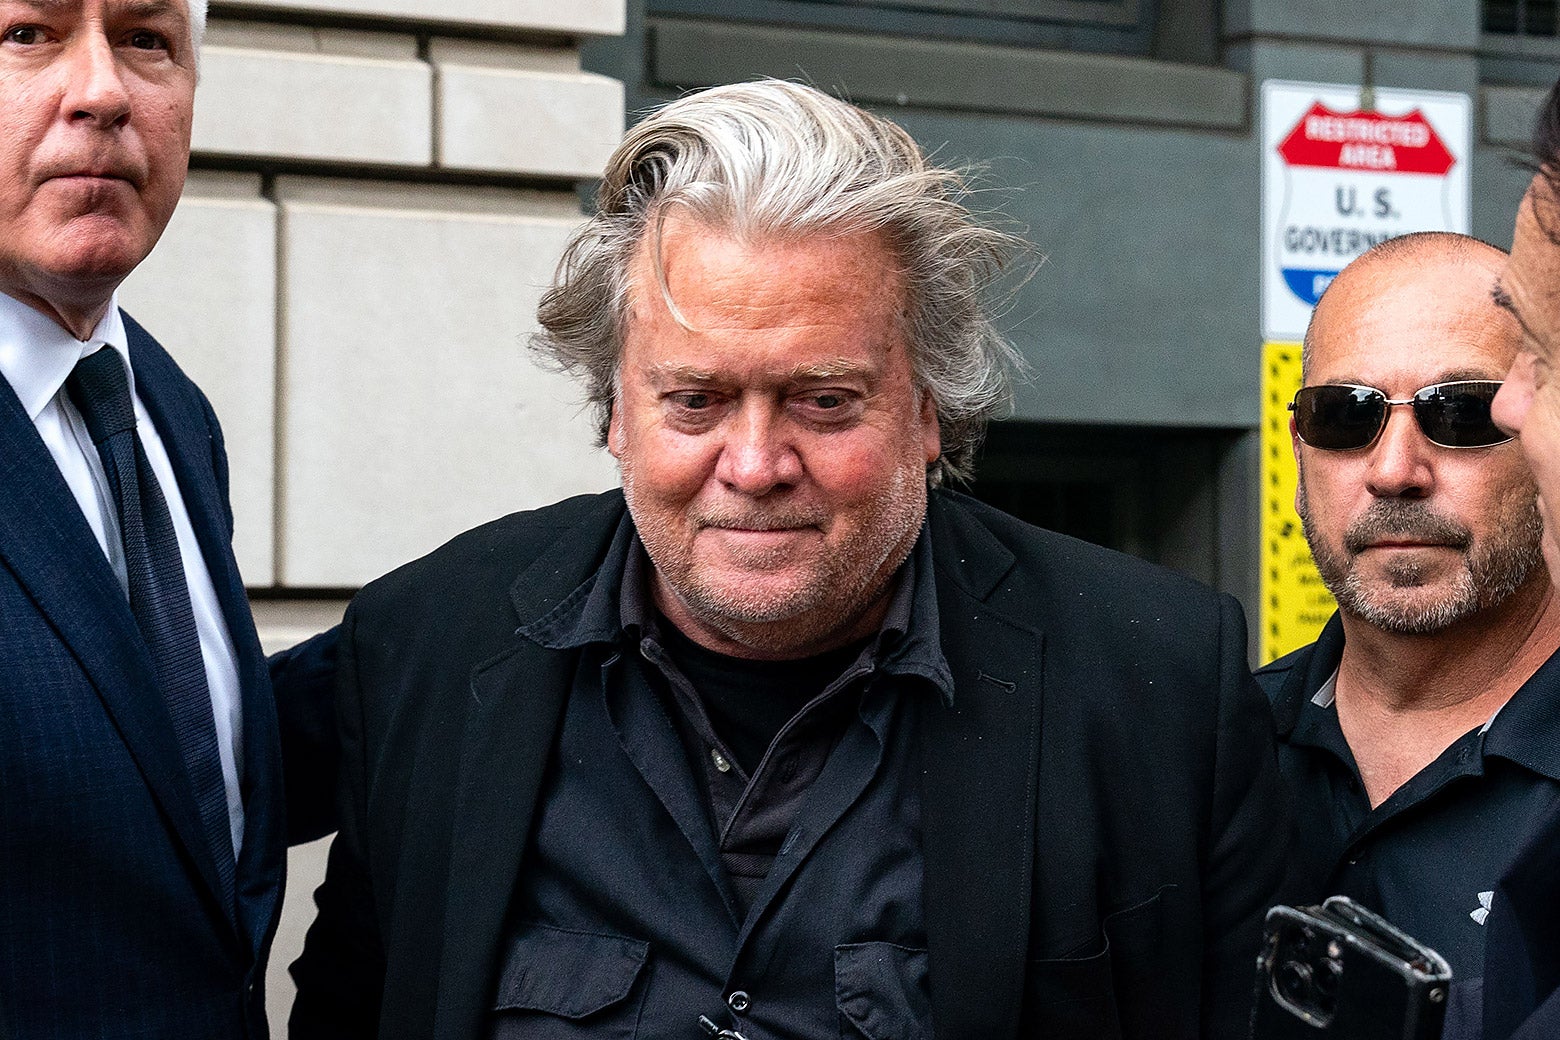 Bannon staring into space, looking slightly downward, as he's escorted by goons.